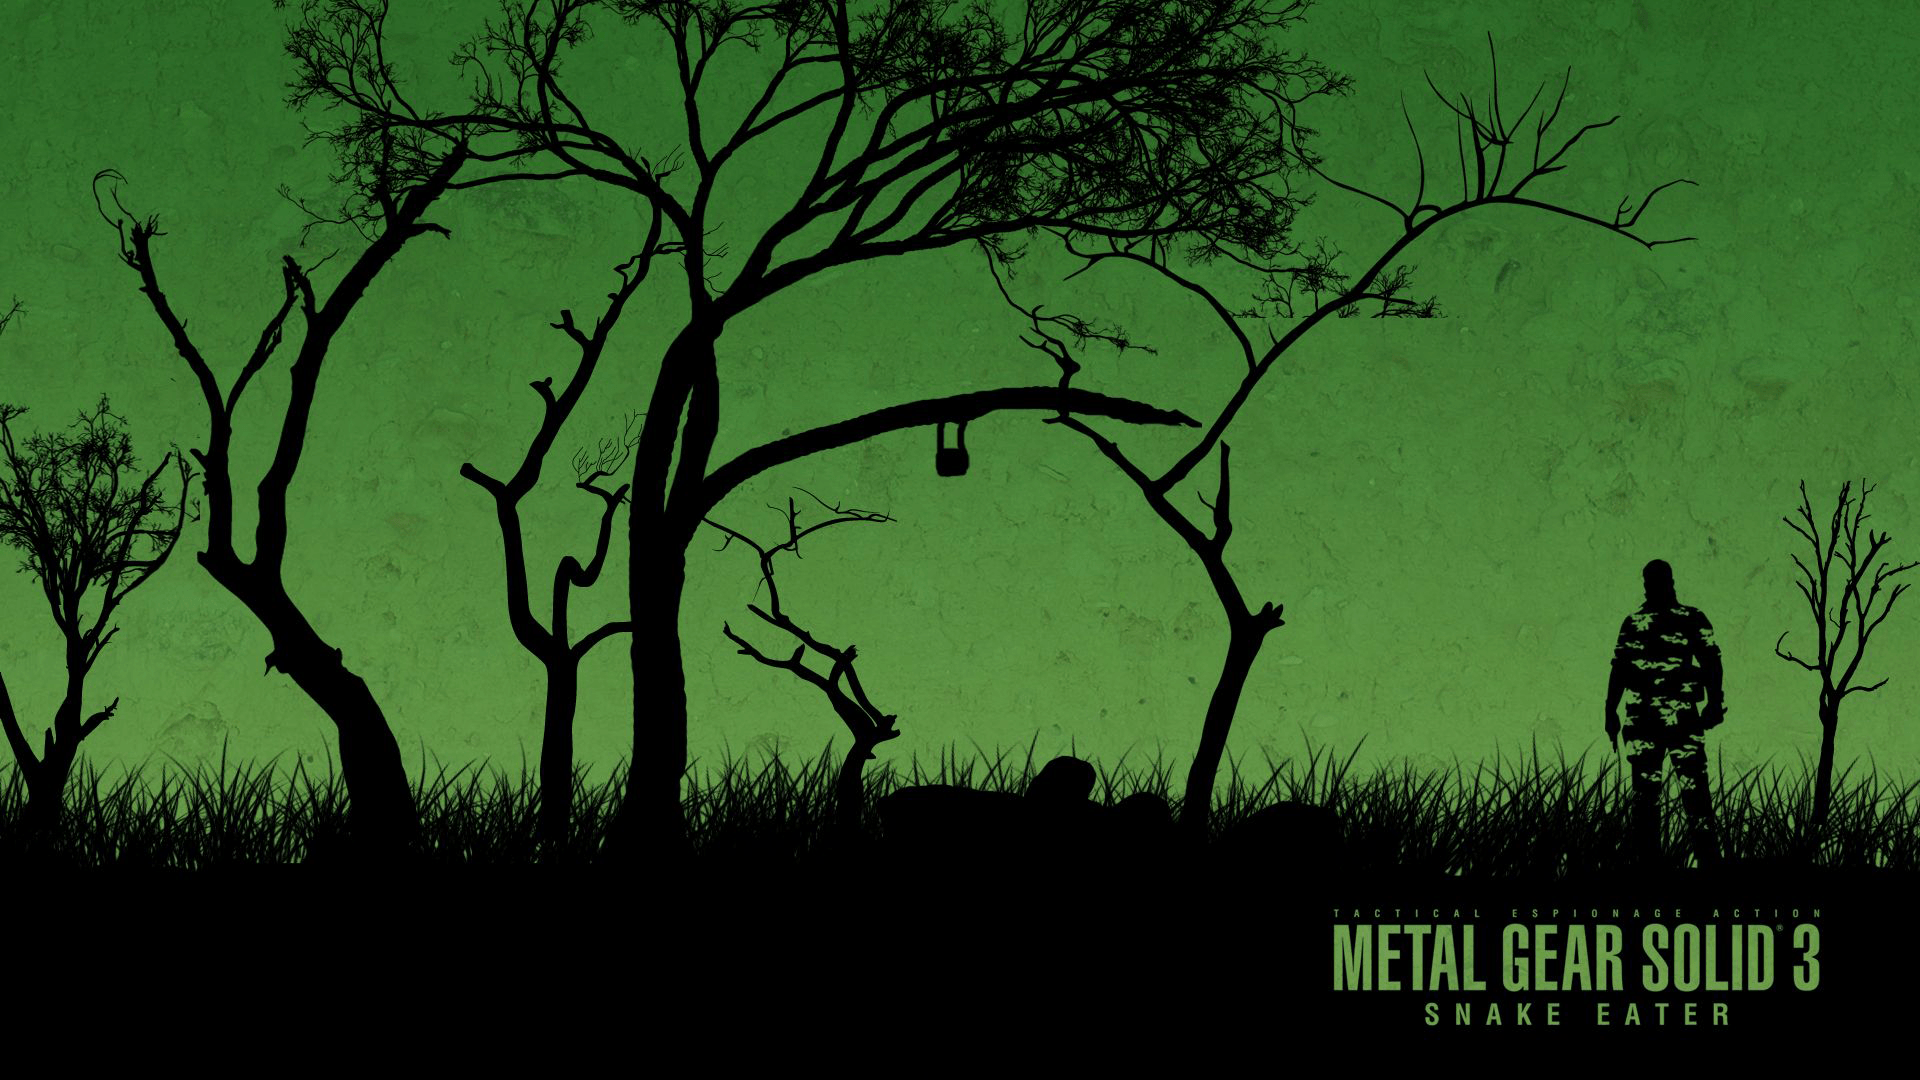 Metal Gear Solid 3: Snake Eater Full HD Wallpaper and Background